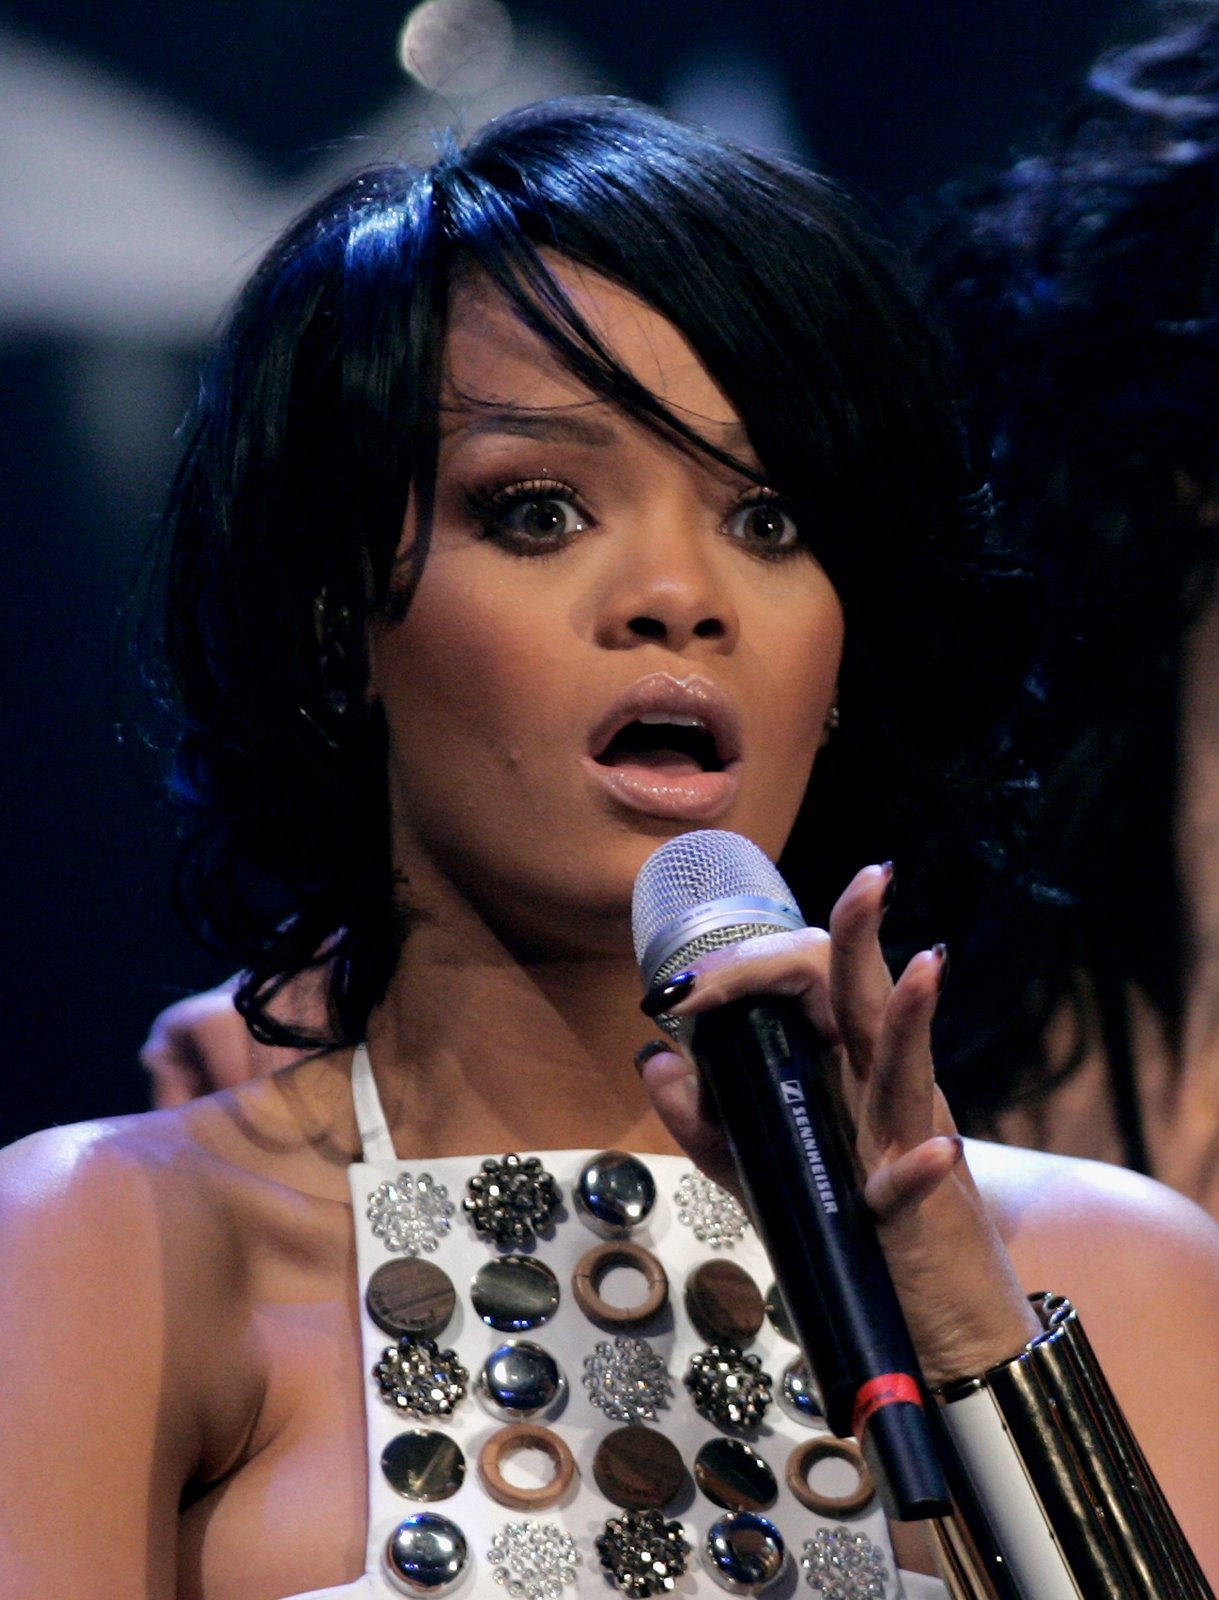 [98882_Celebutopia-Rihanna_performs_during_the_German_TV_show_Wetten4_dass_in_Leipzig-08_122_537lo.jpg]